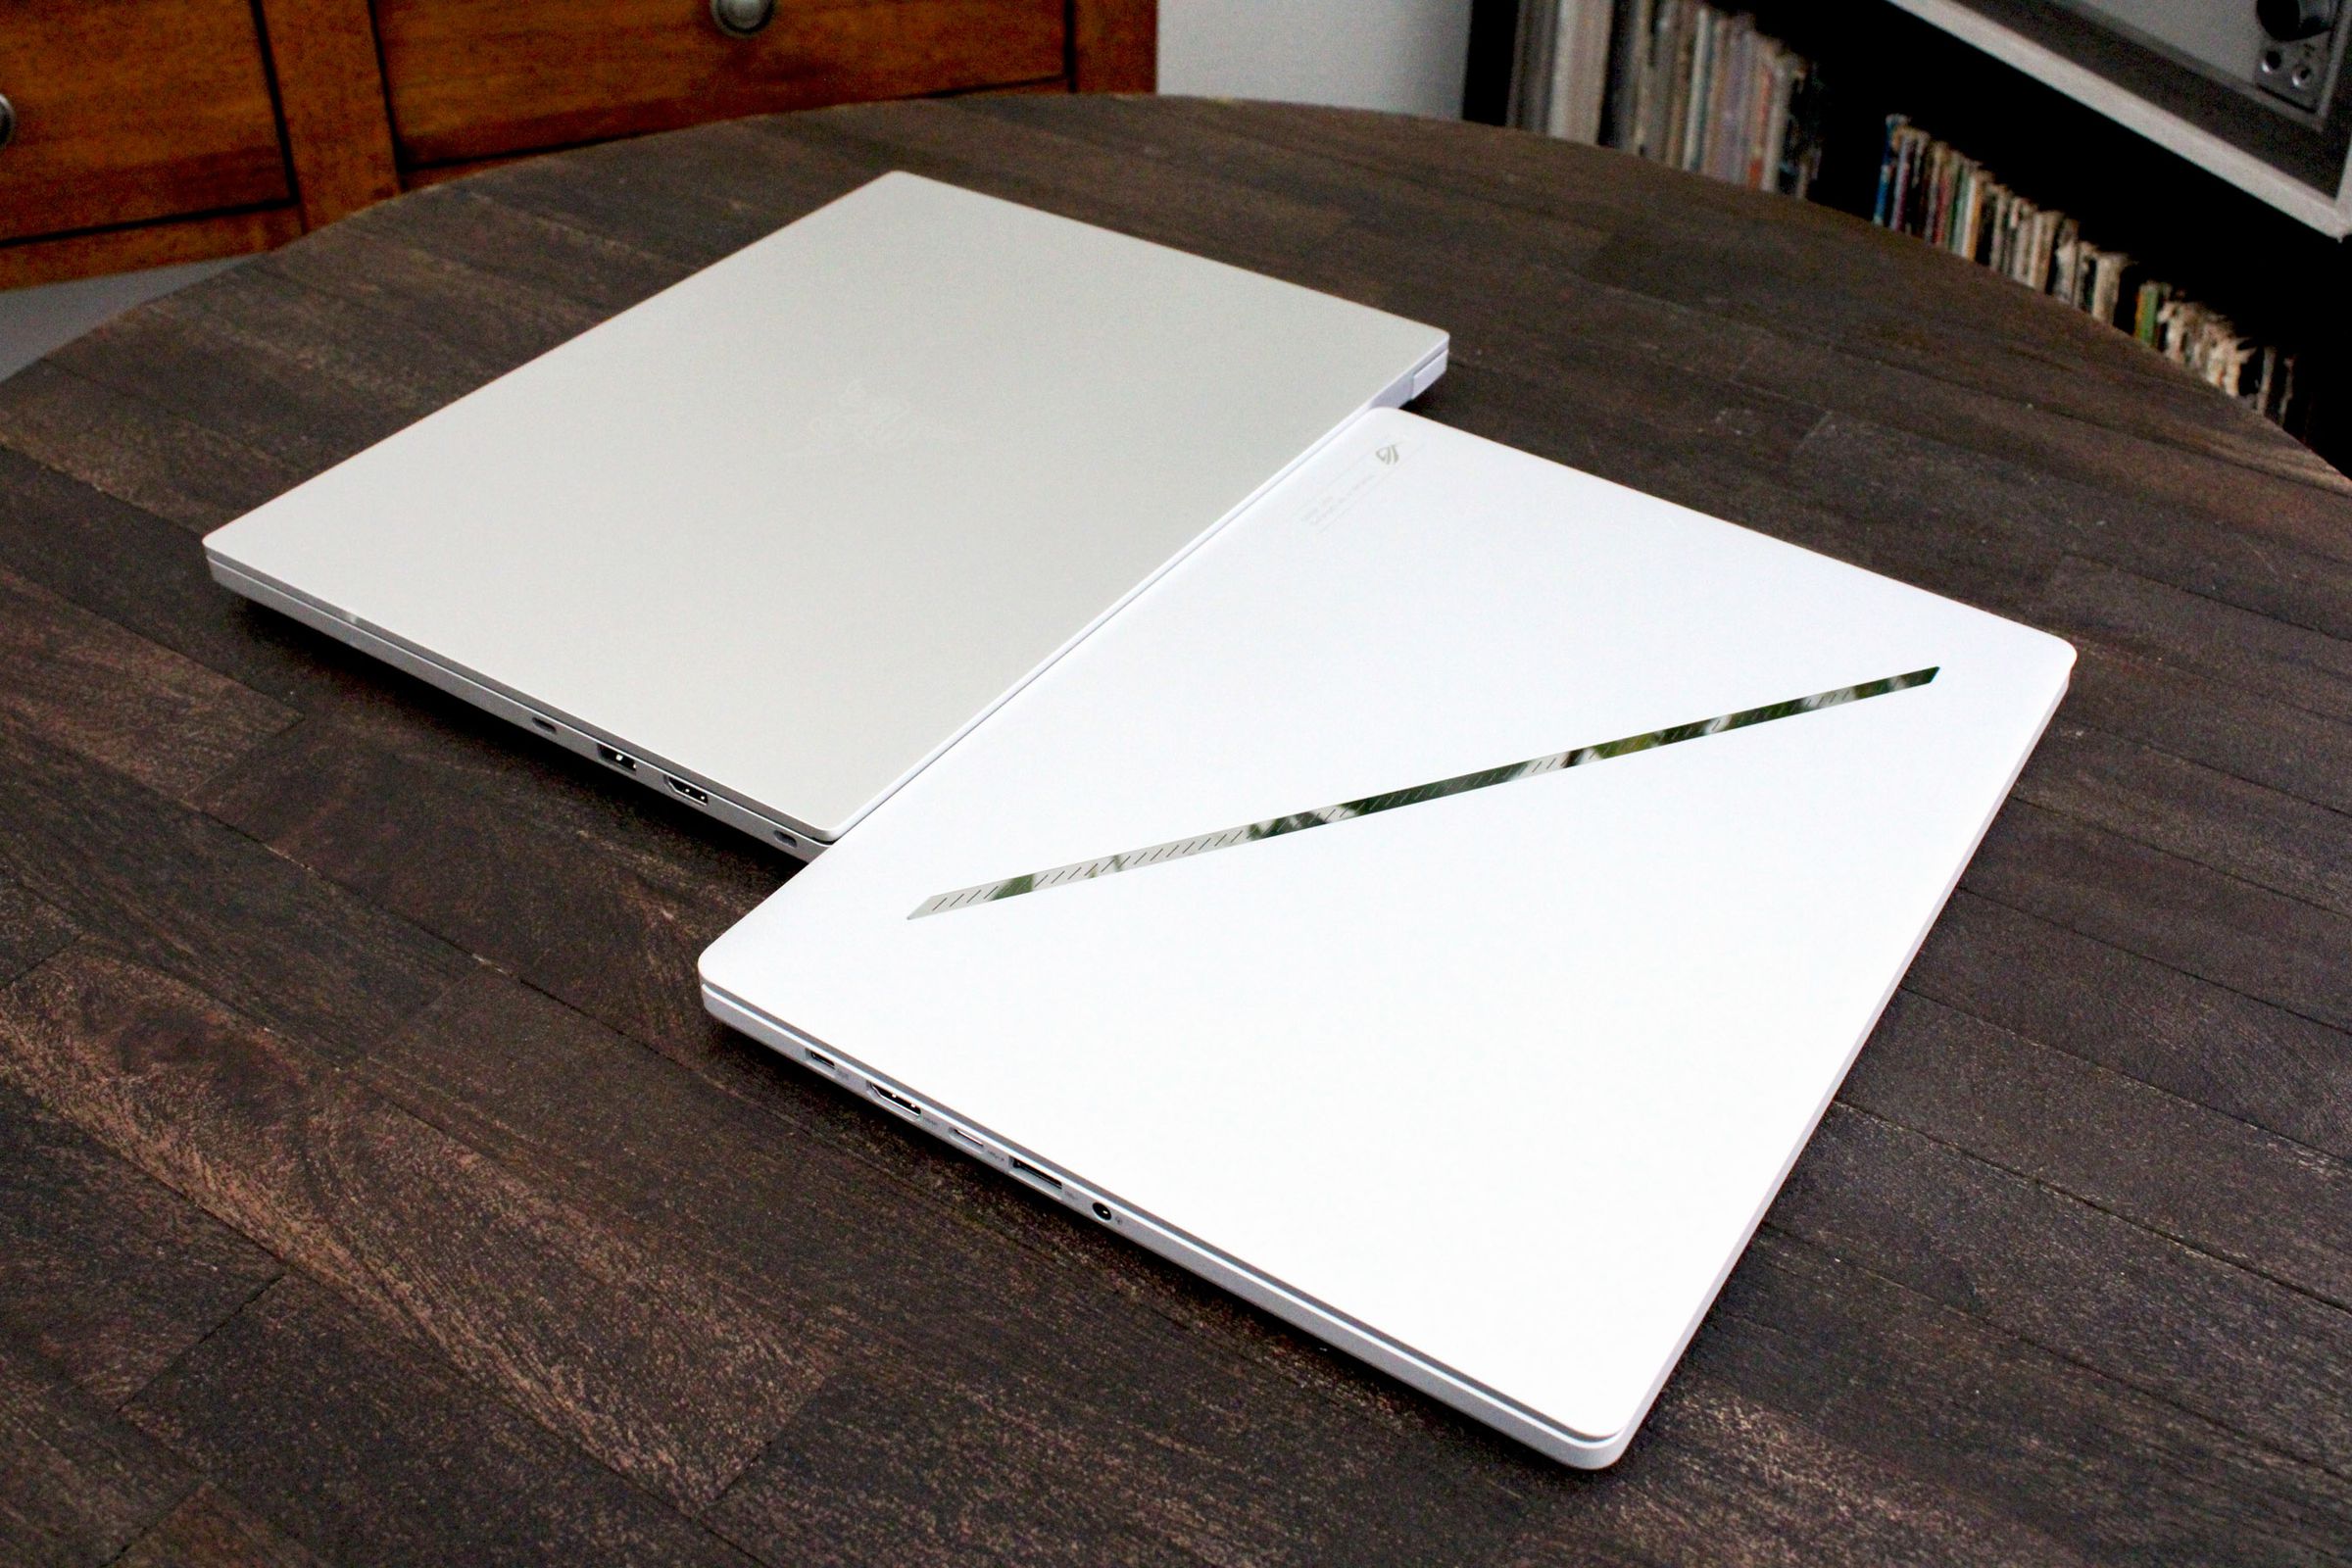 Two laptops with their lids closed next to one another on top of a dark wood table